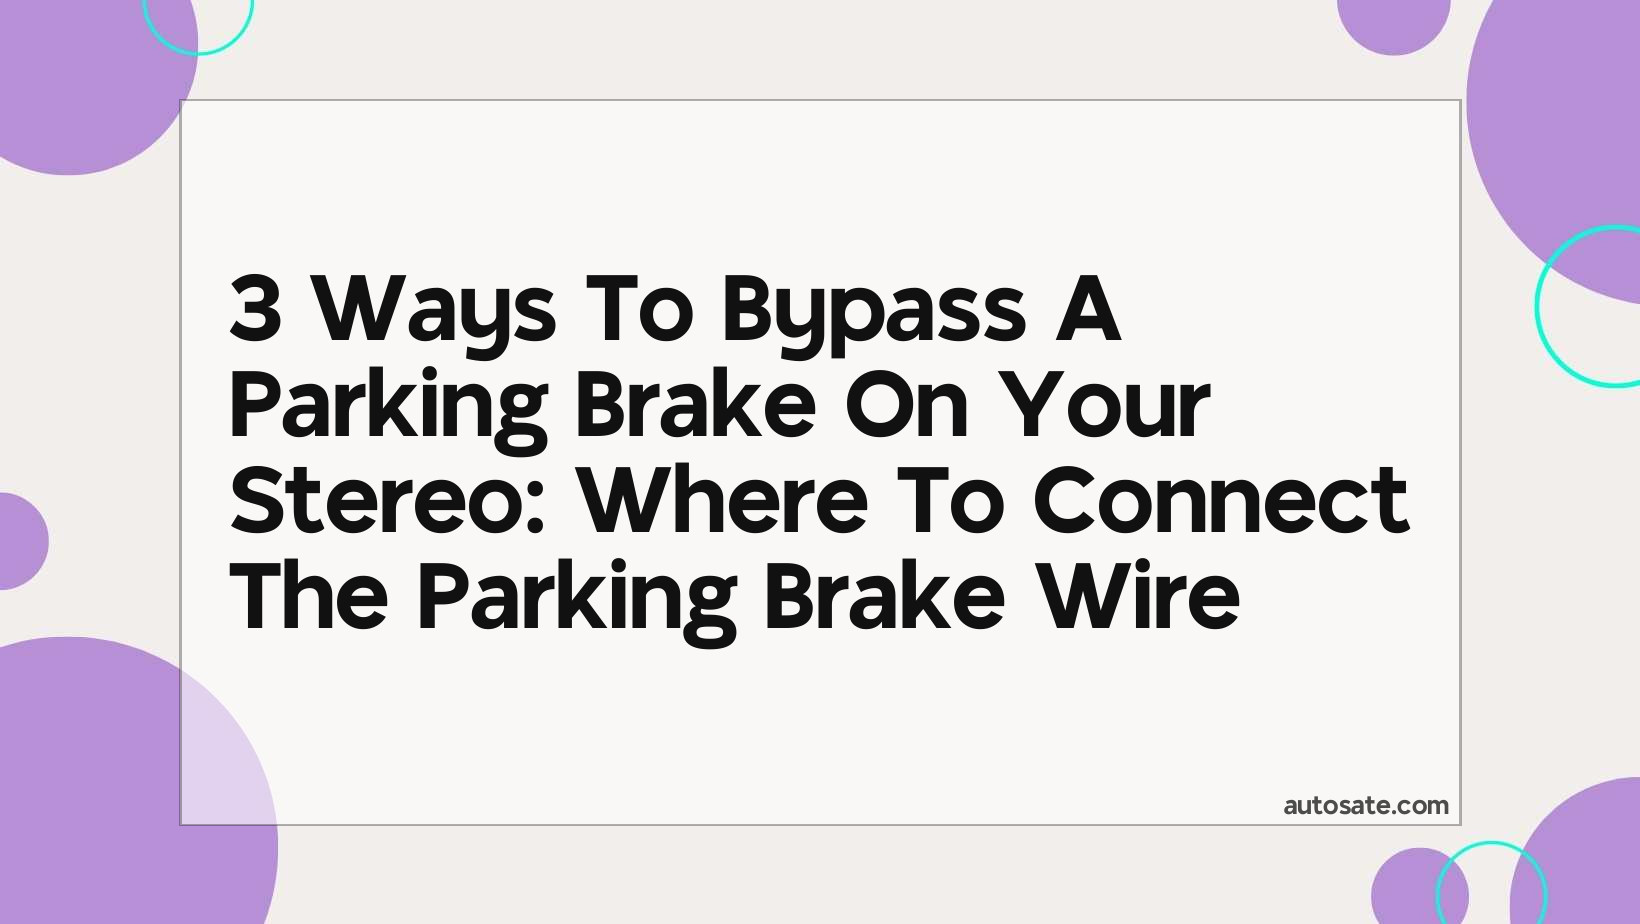 3 Ways To Bypass A Parking Brake On Your Stereo: Where To Connect The Parking Brake Wire